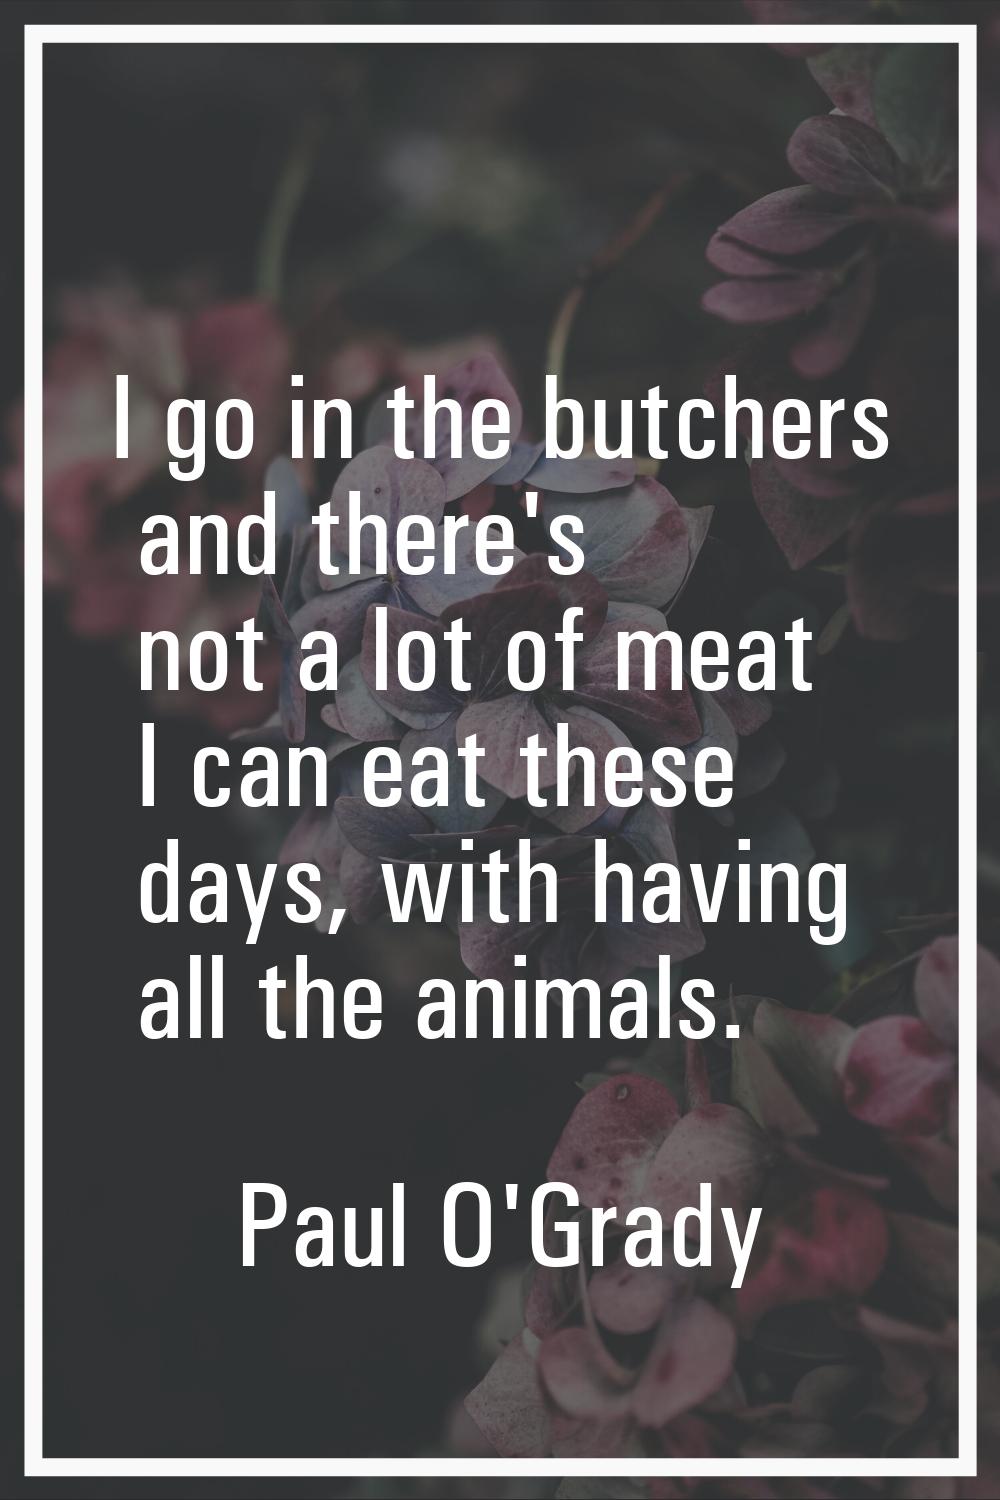 I go in the butchers and there's not a lot of meat I can eat these days, with having all the animal